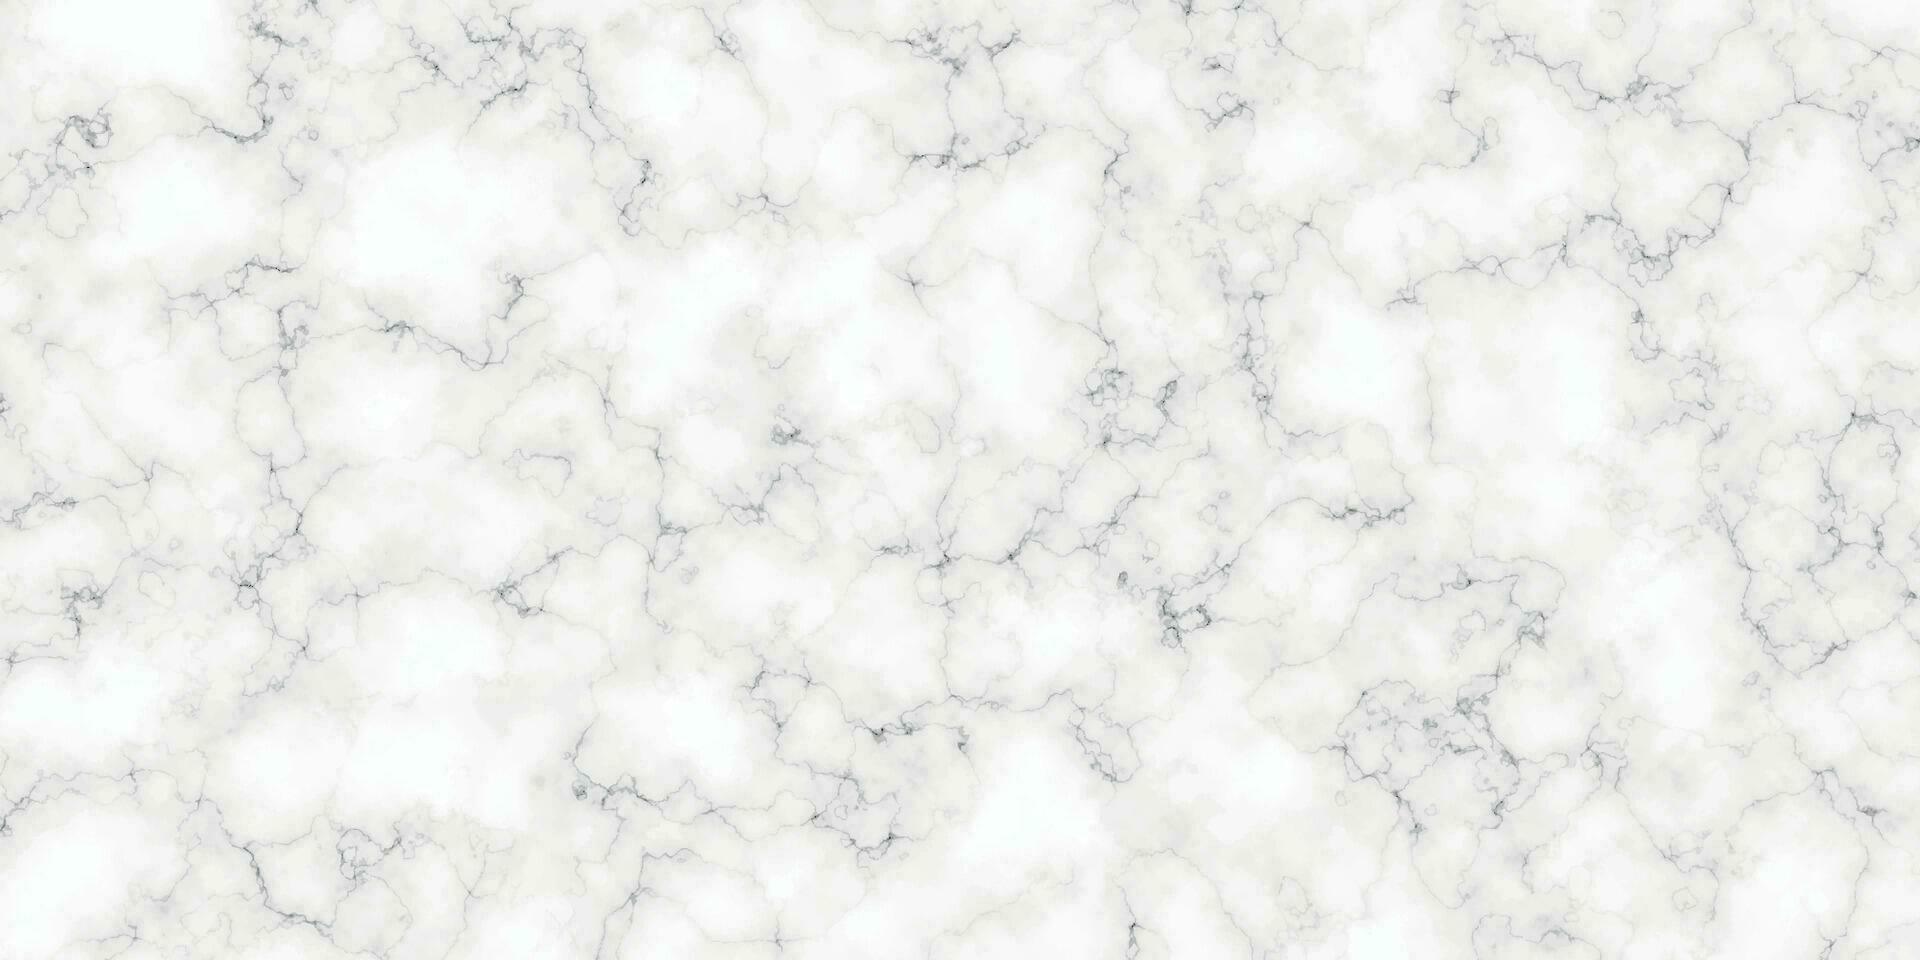 White Marble Texture Background. Black and White Marble Textured. White Background Marble Wall Texture. Panoramic White Background. White Carrara Marble Stone Texture vector